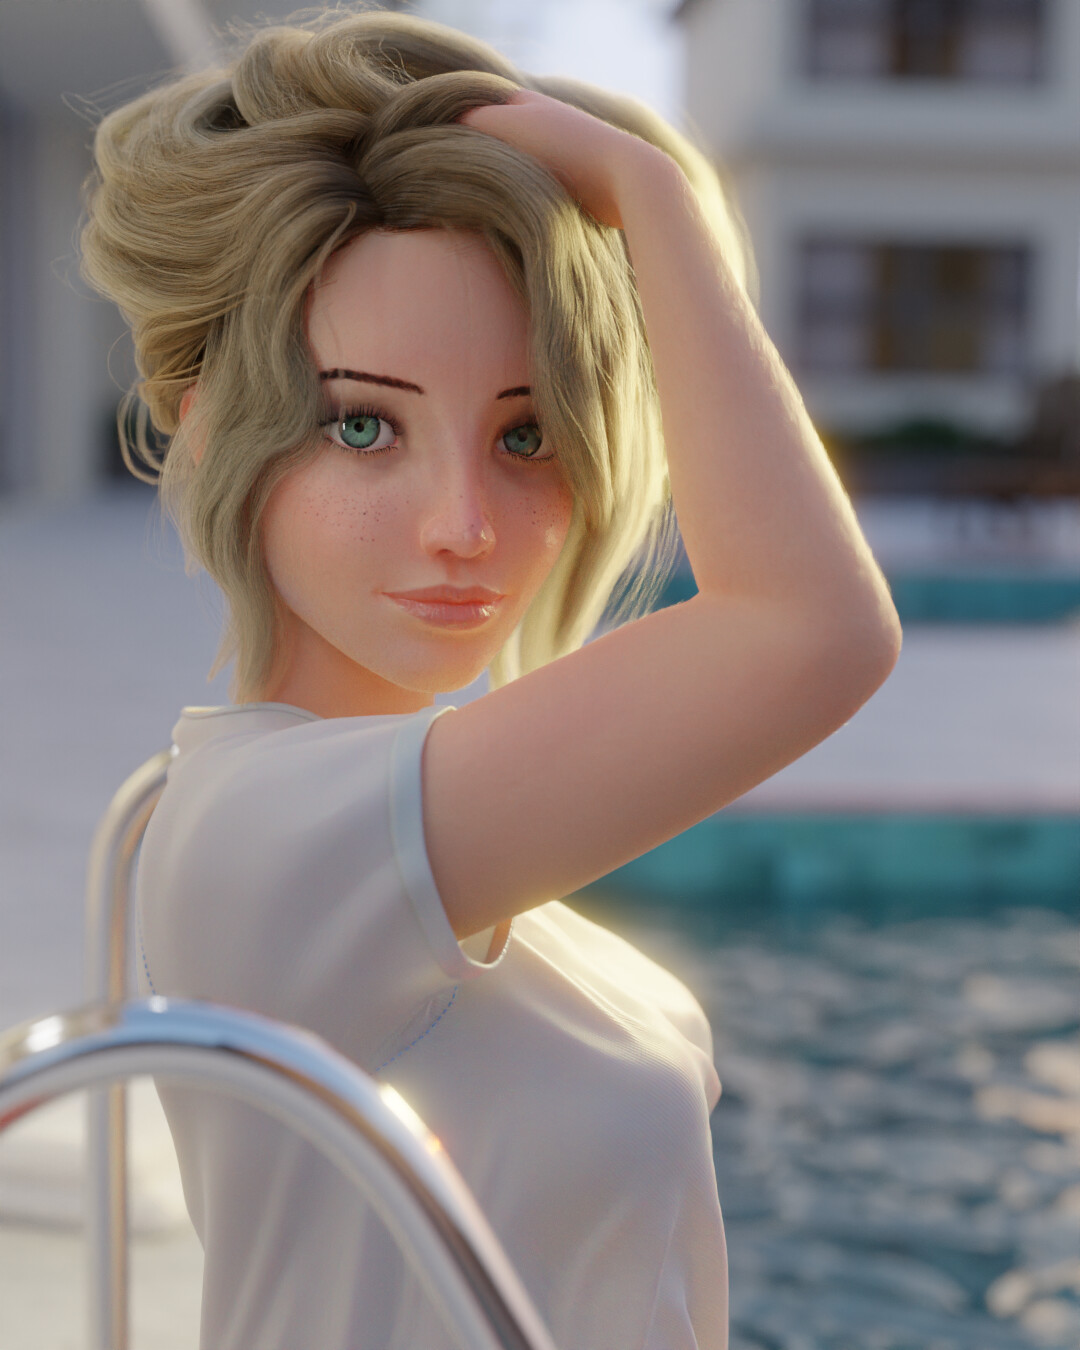 Blondie at the pool - Finished Projects - Blender Artists Community